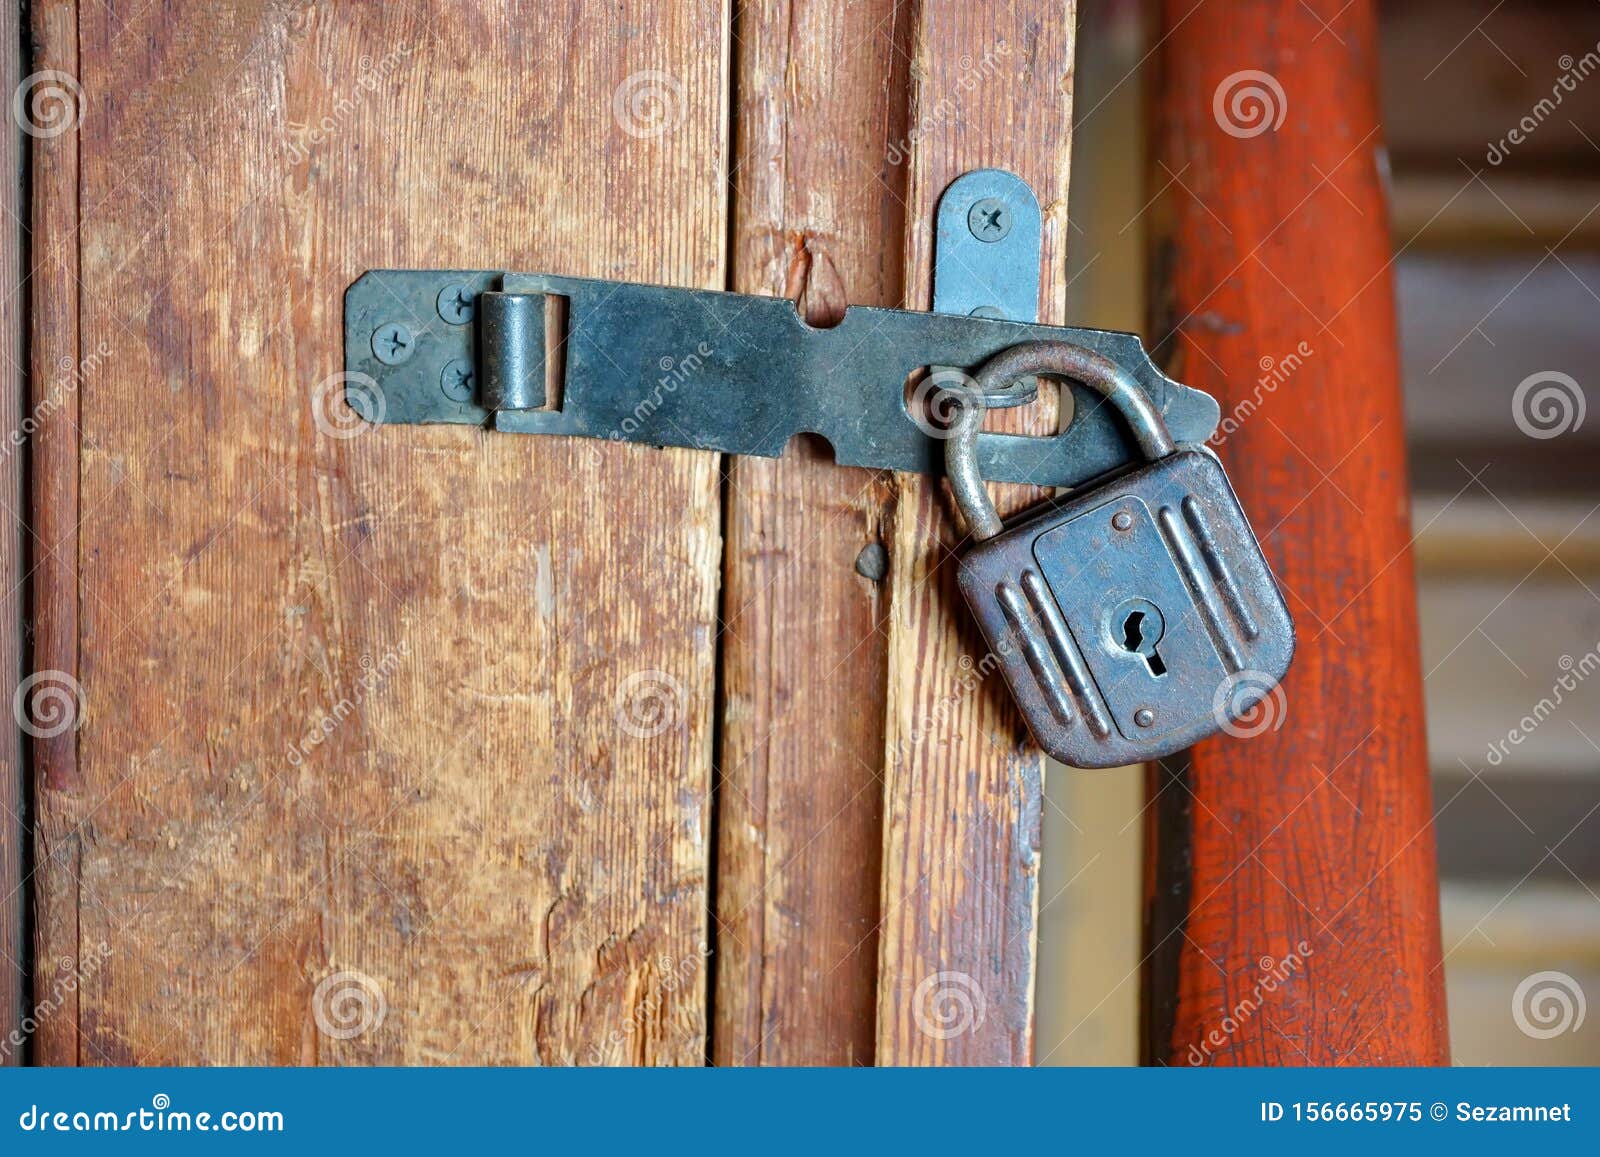 Old Small Lock Hanging On The Pantry Door Stock Image - Image of access, entrance: 156665975 How To Lock A Pantry Door